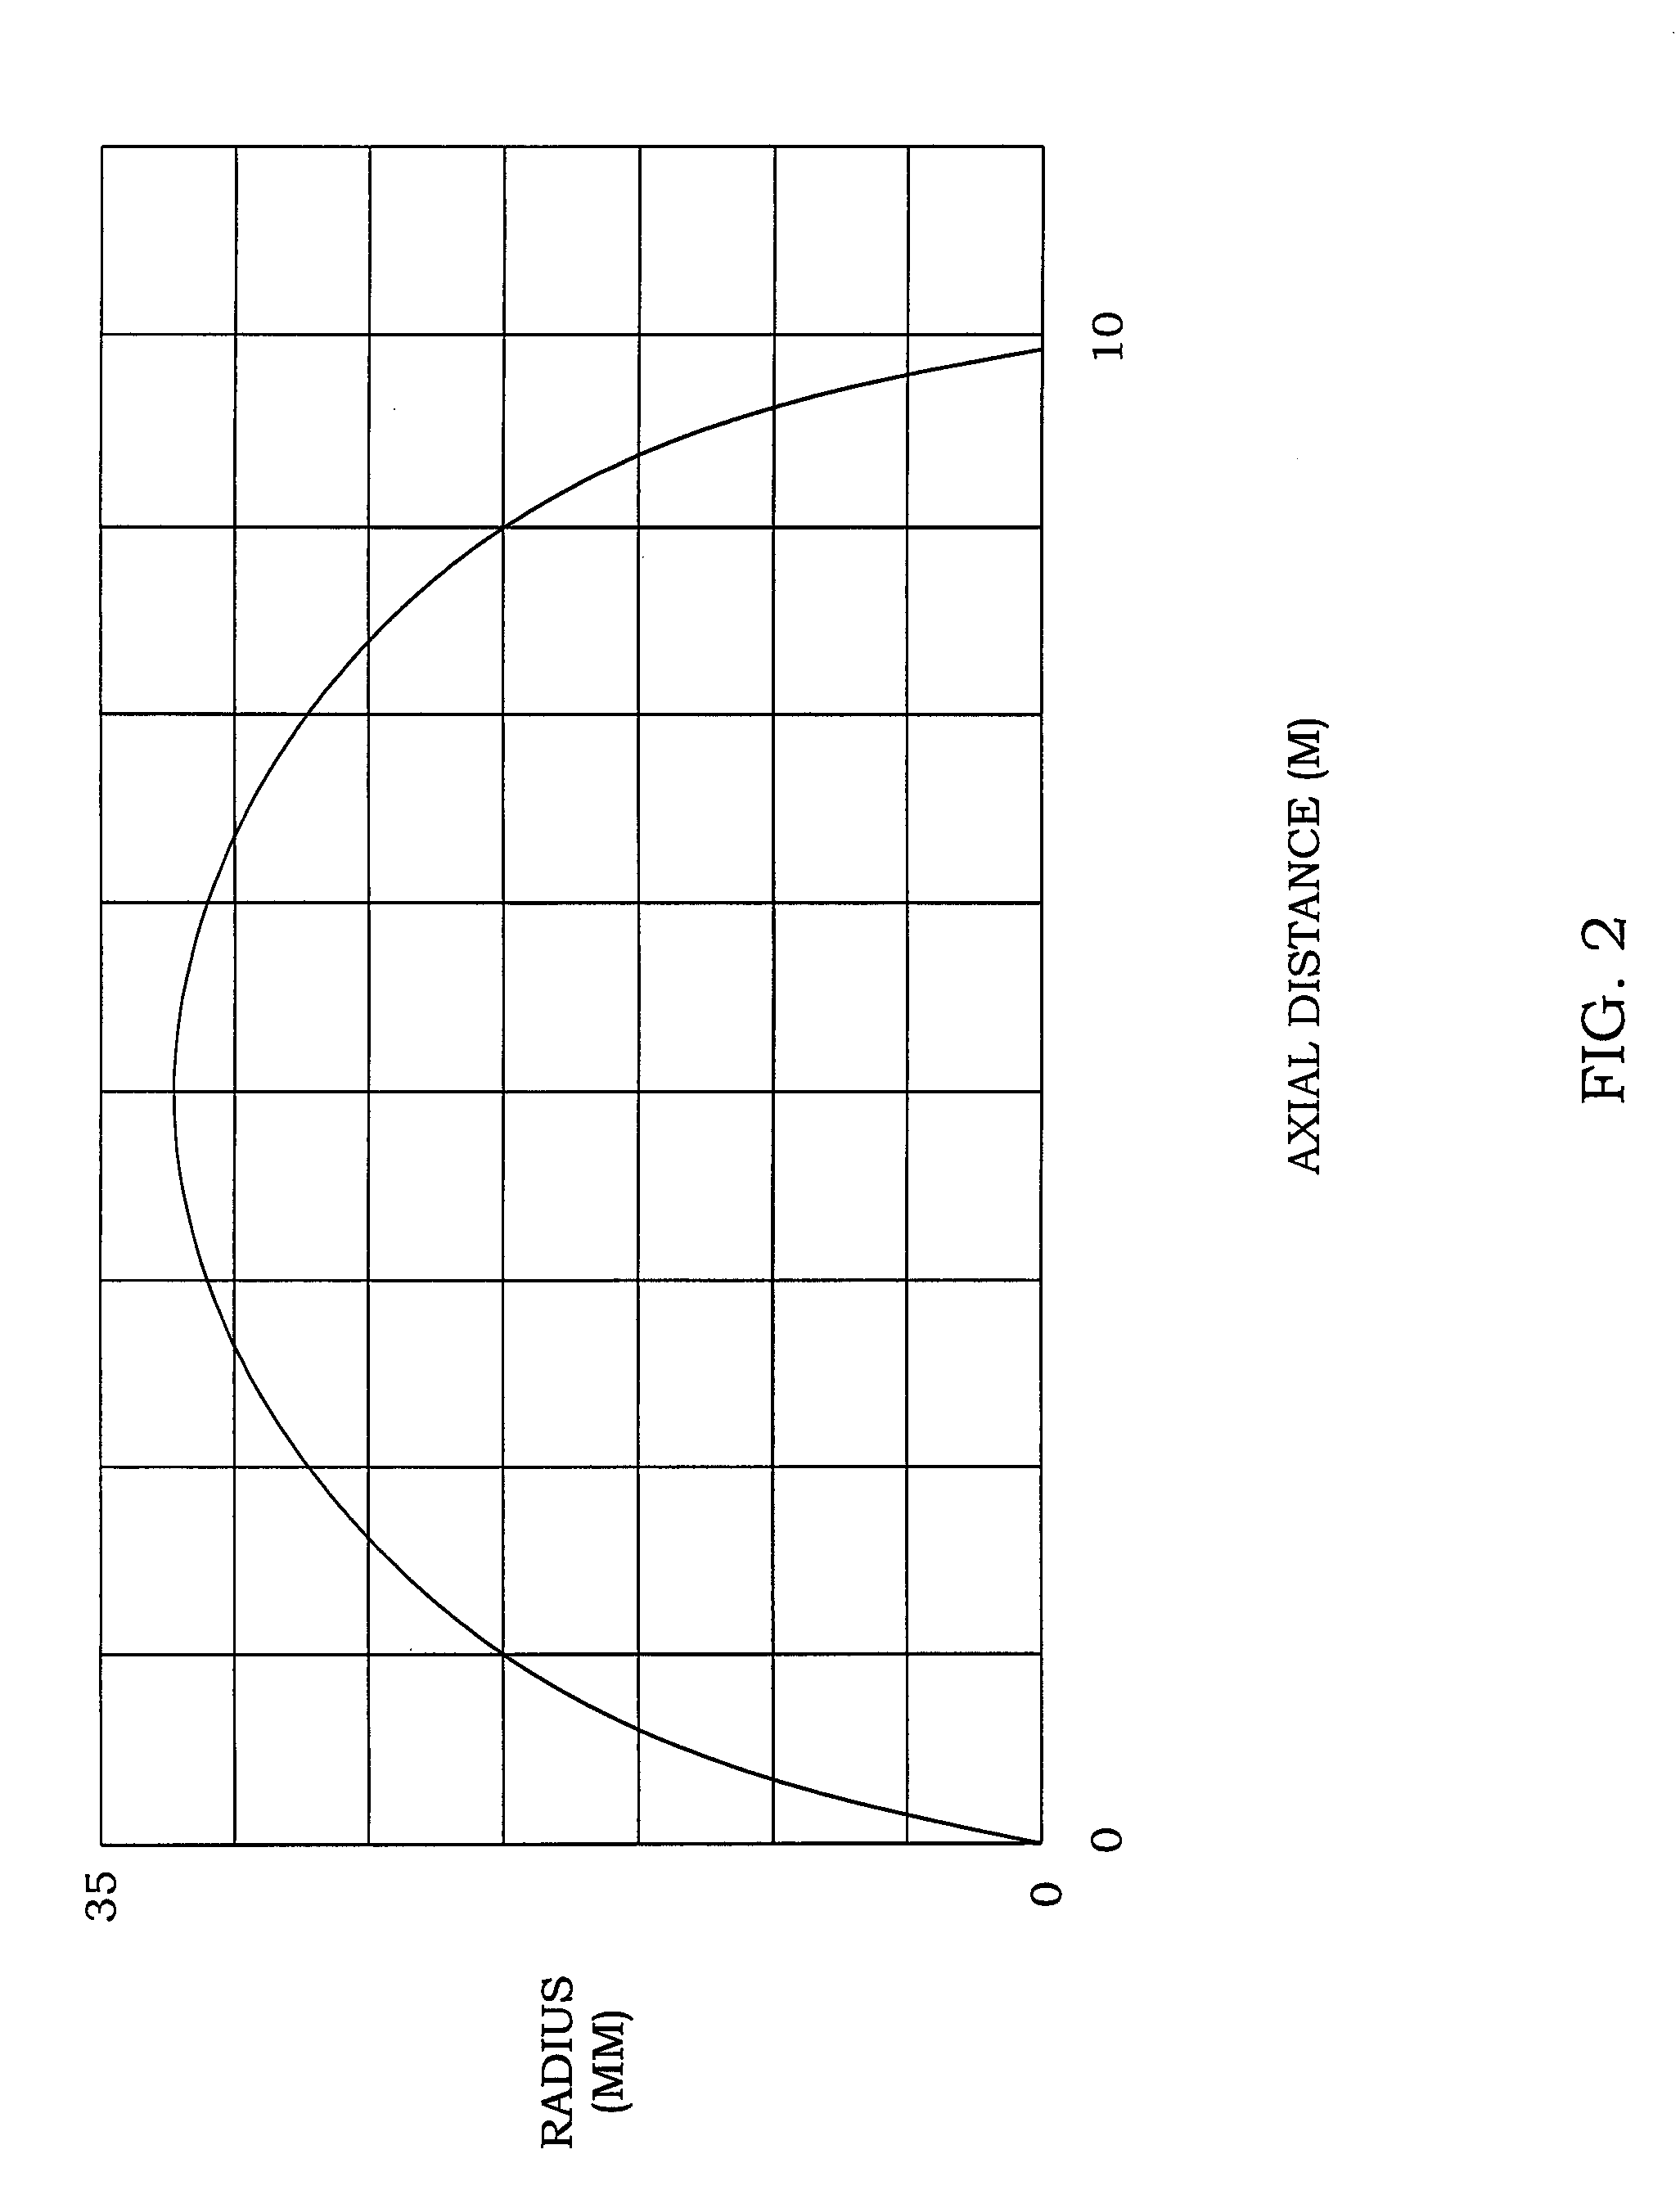 Supercavitating projectile tracking system and method